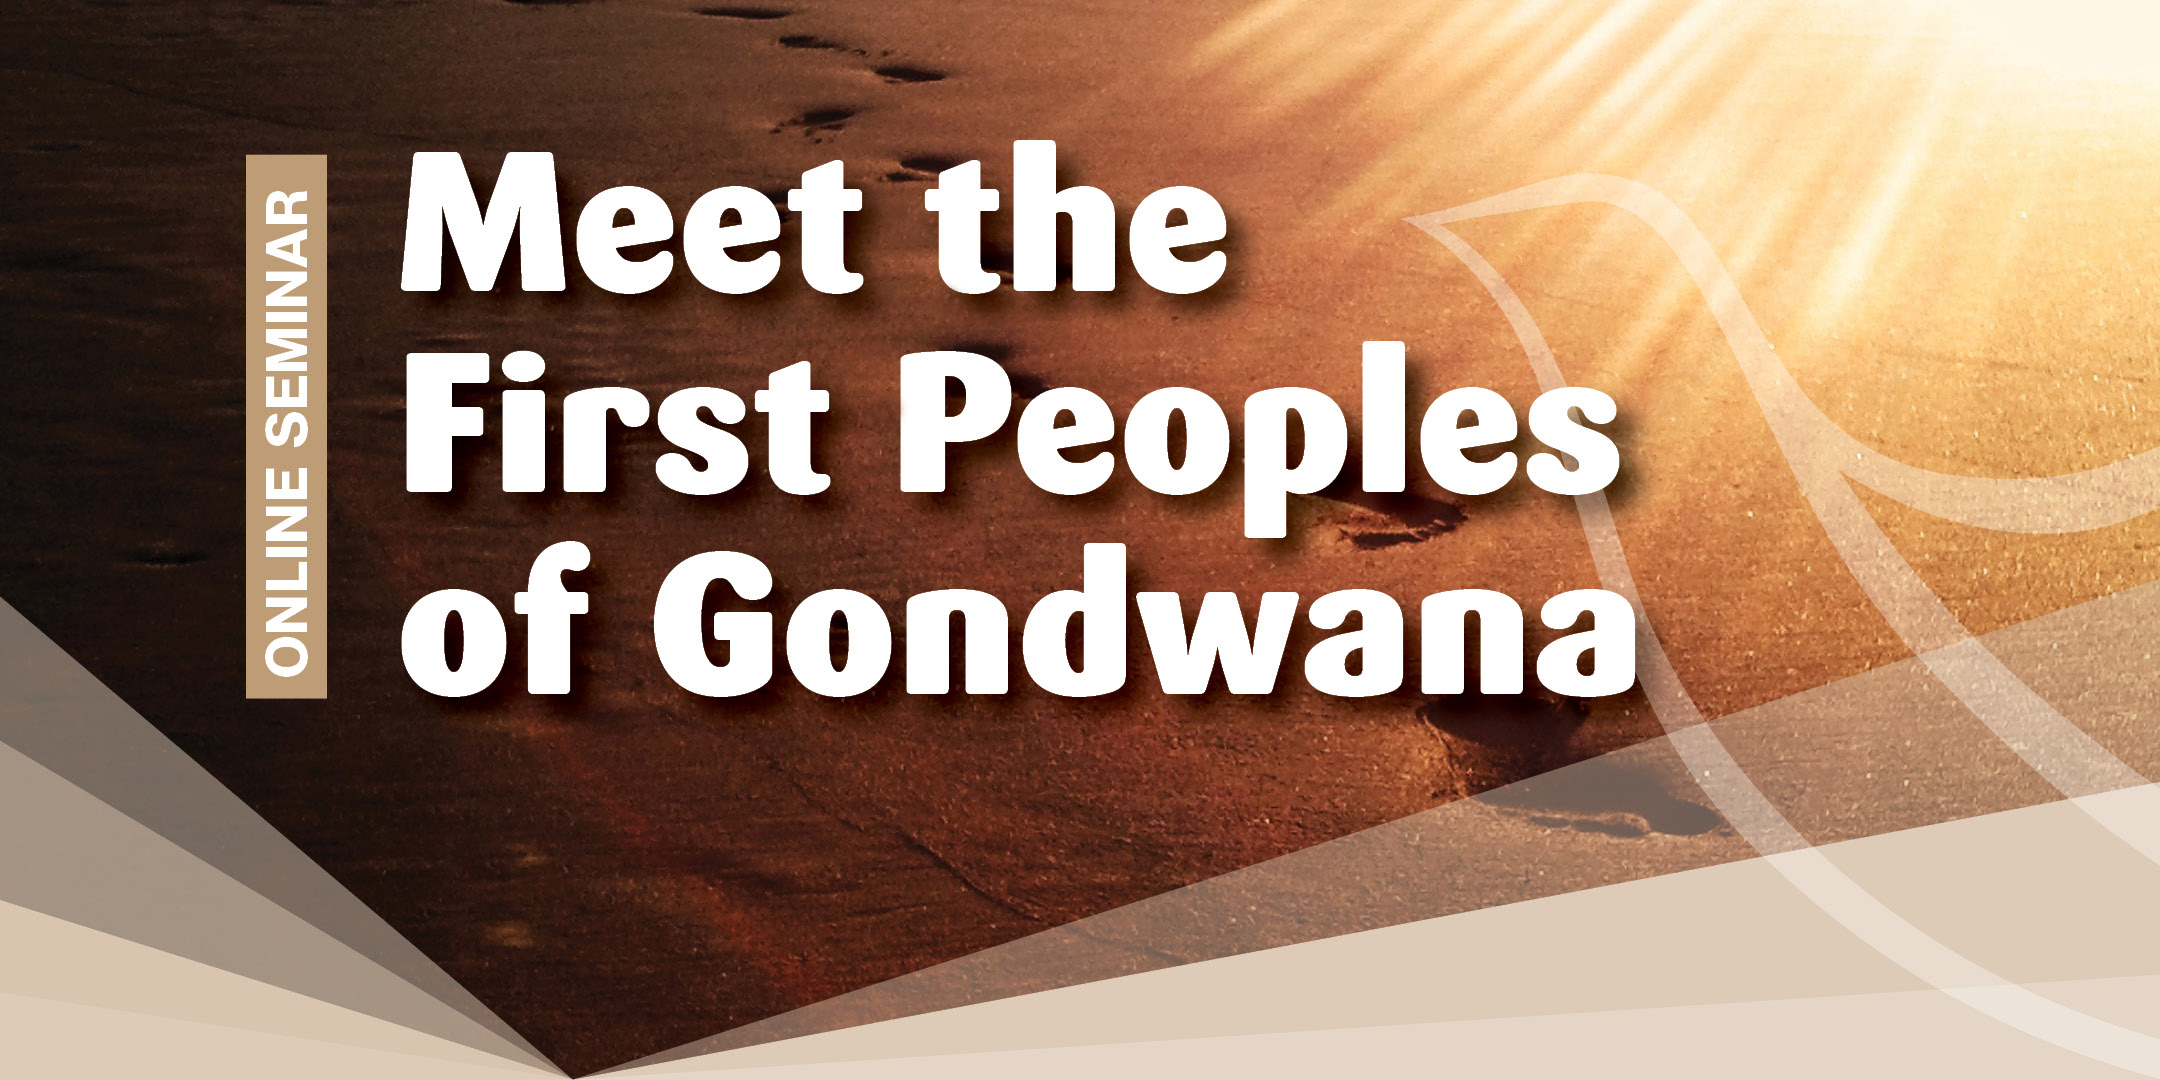 Picture of 210818 efl meetfirstpeople webbanner in the page Meet the First Peoples of Gondwana